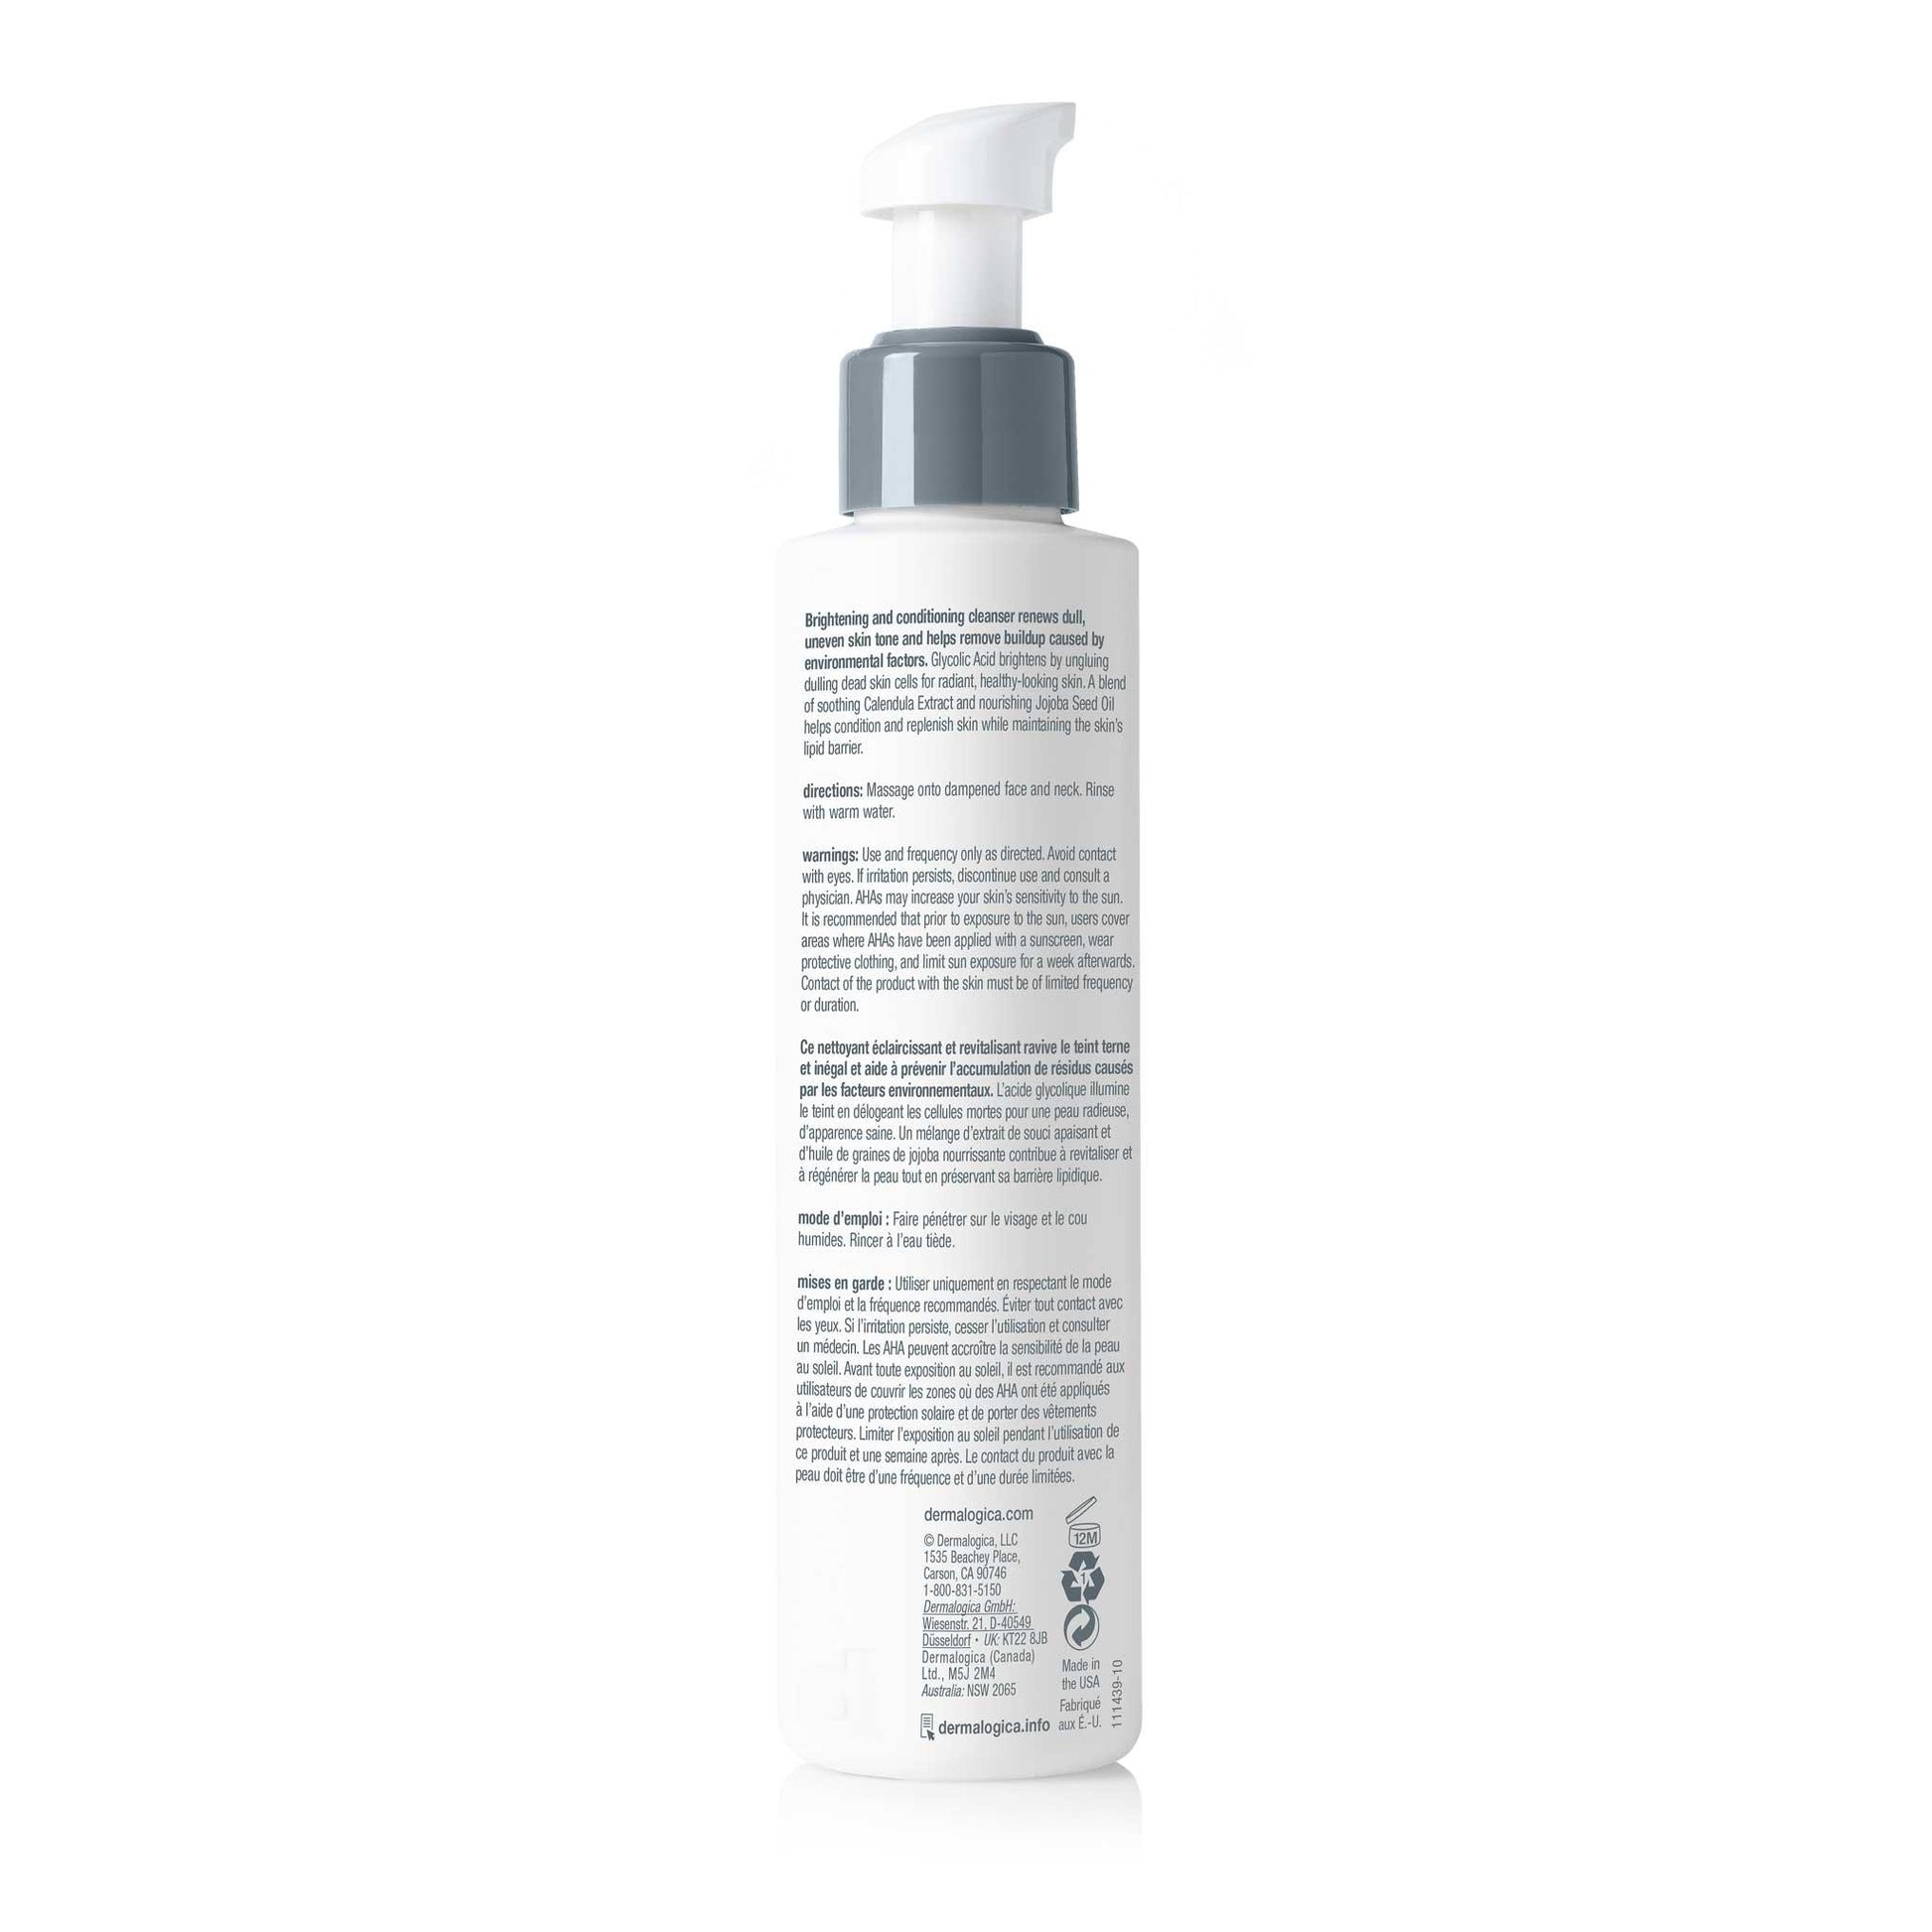 daily glycolic cleanser - Dermalogica Malaysia